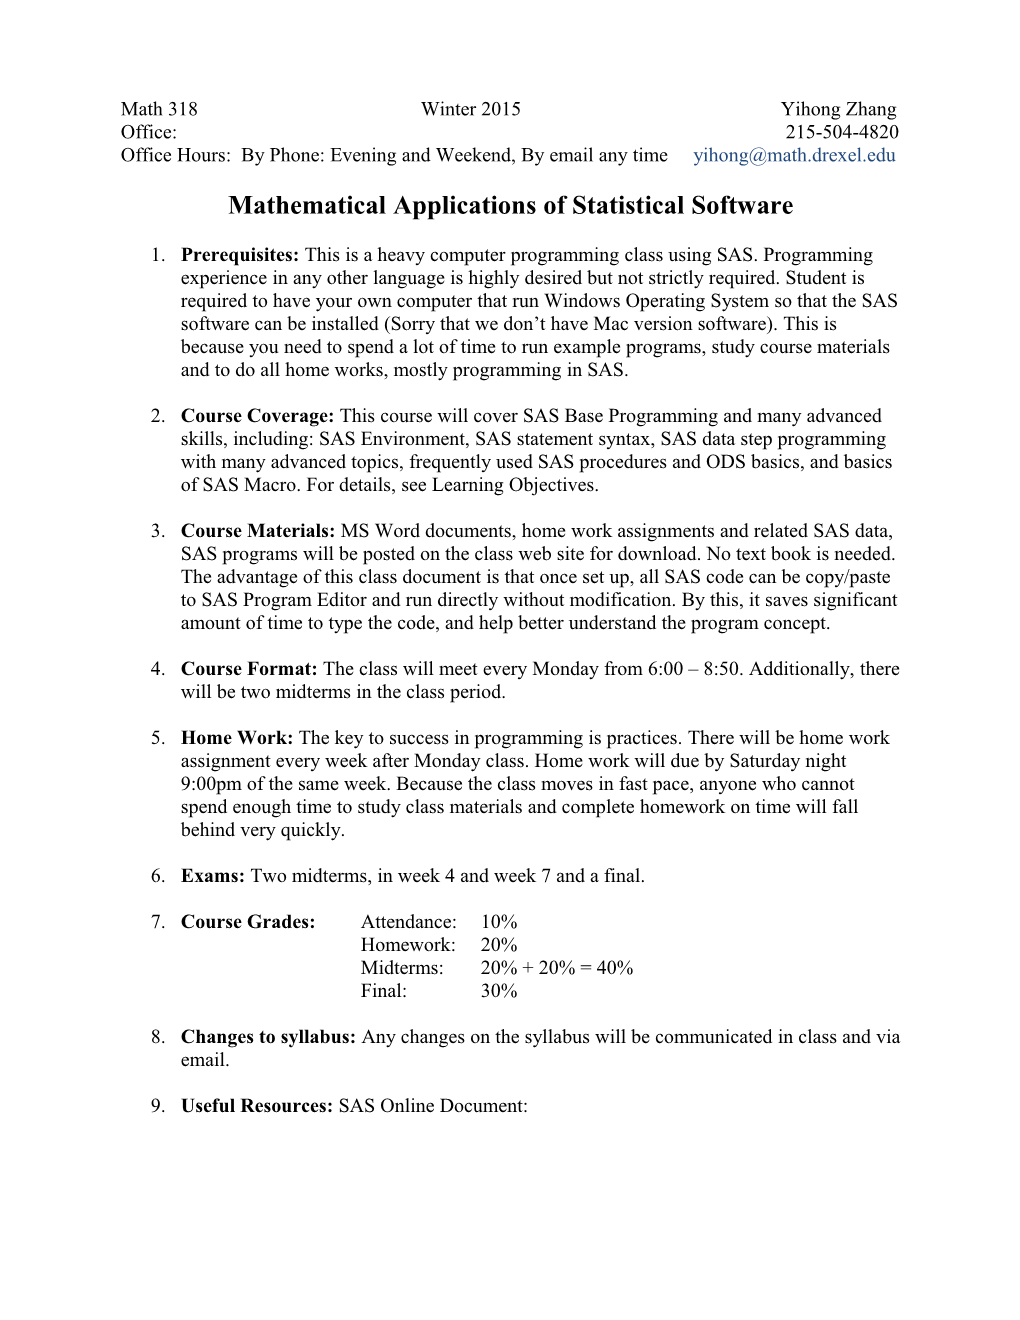 Mathematical Applications of Statistical Software